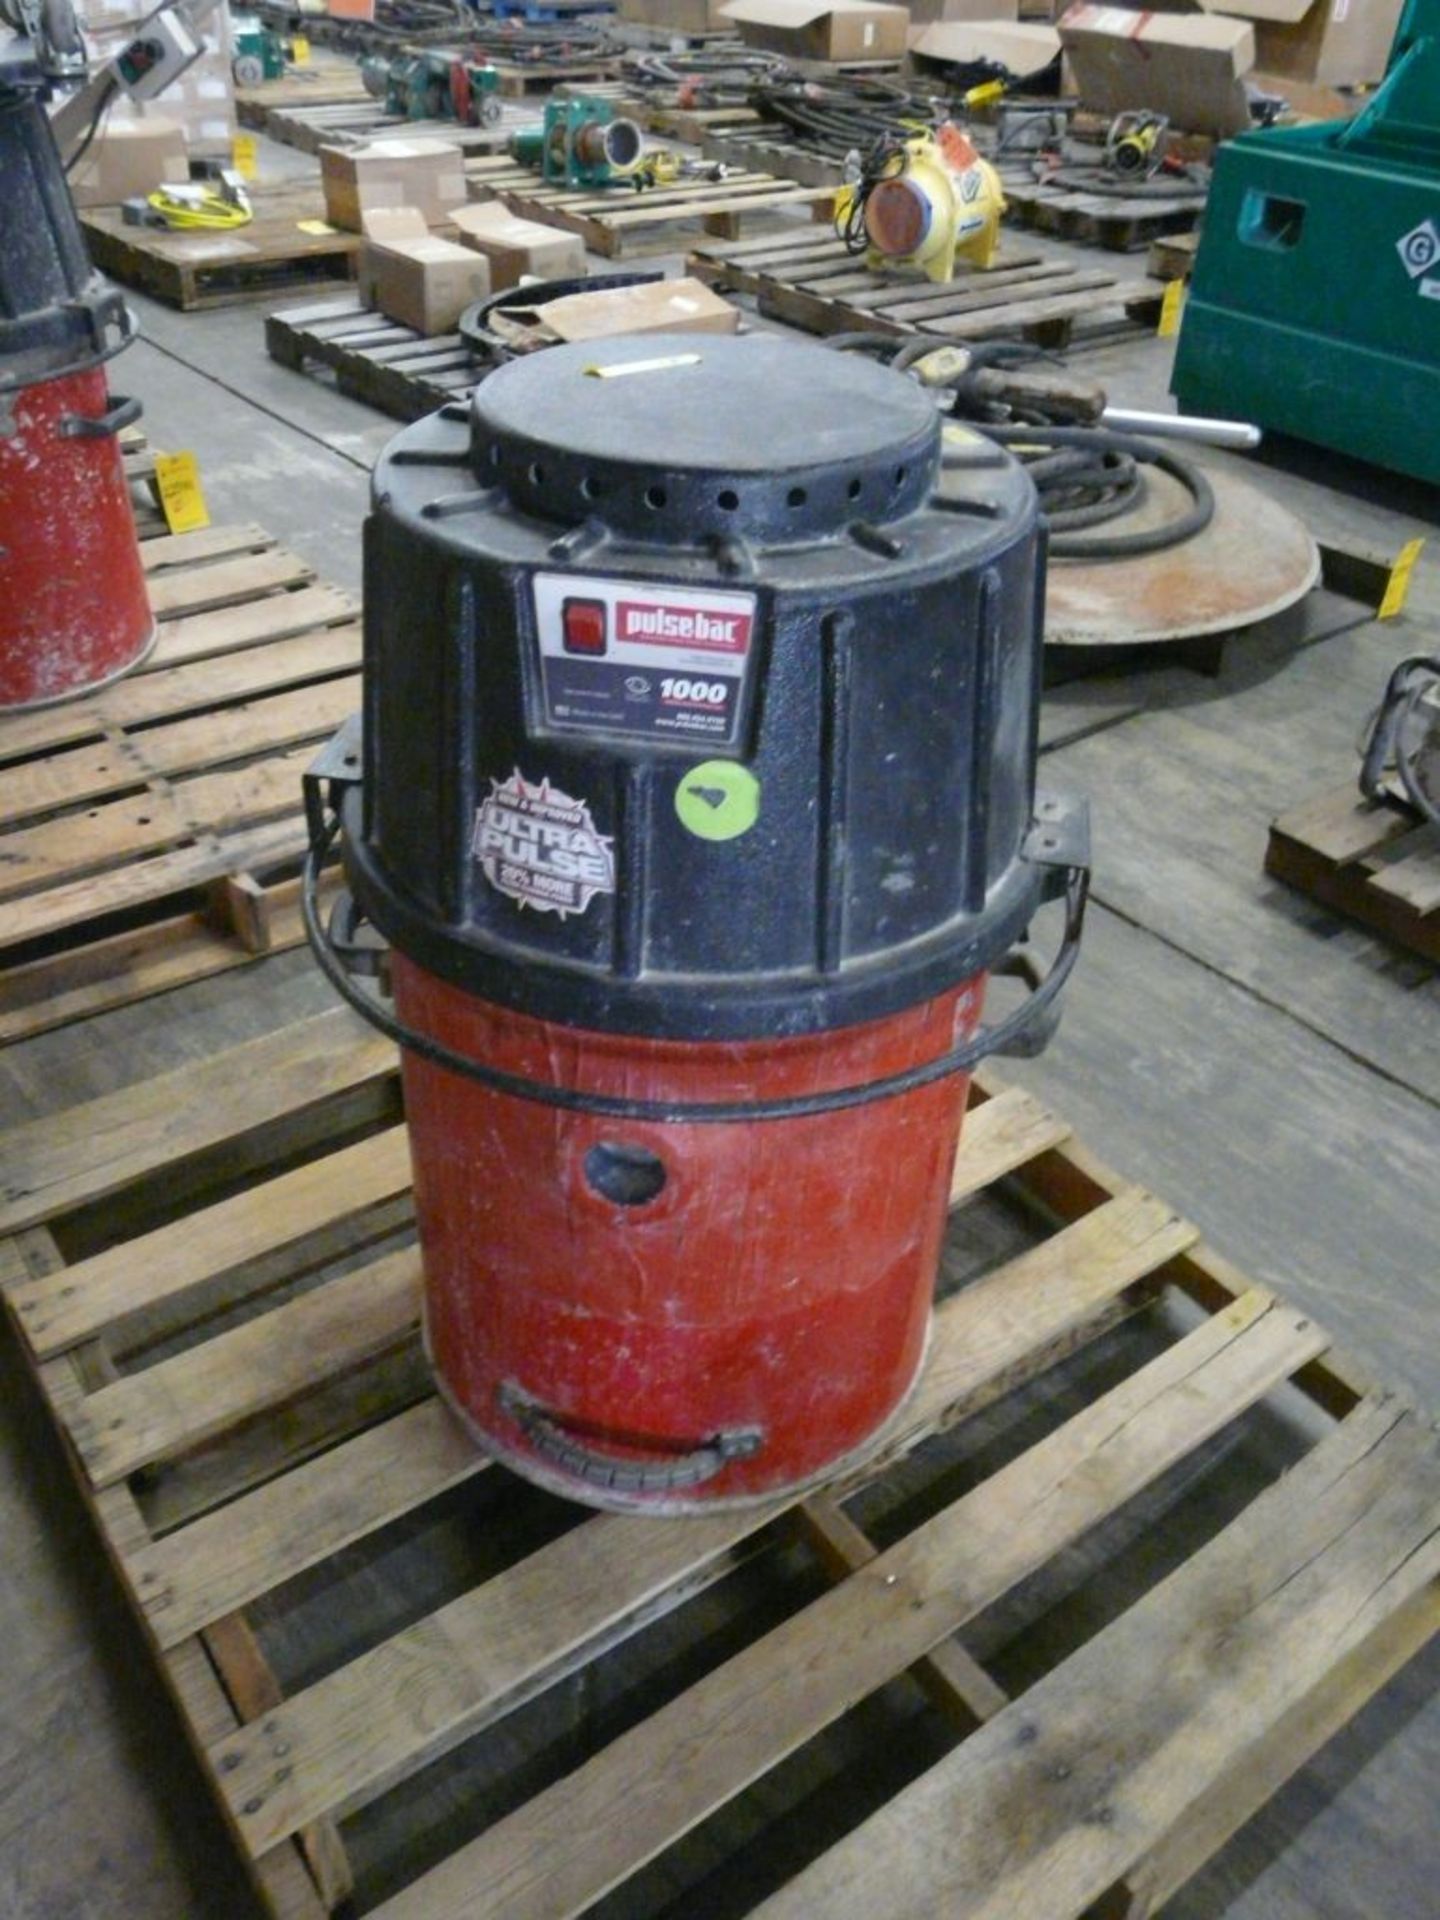 Pulse Bar 1000 Series Dust Extractor|Model No. PB-1050; 12.1A; 110V; CFM 140; Tag: 225709 - Image 2 of 4